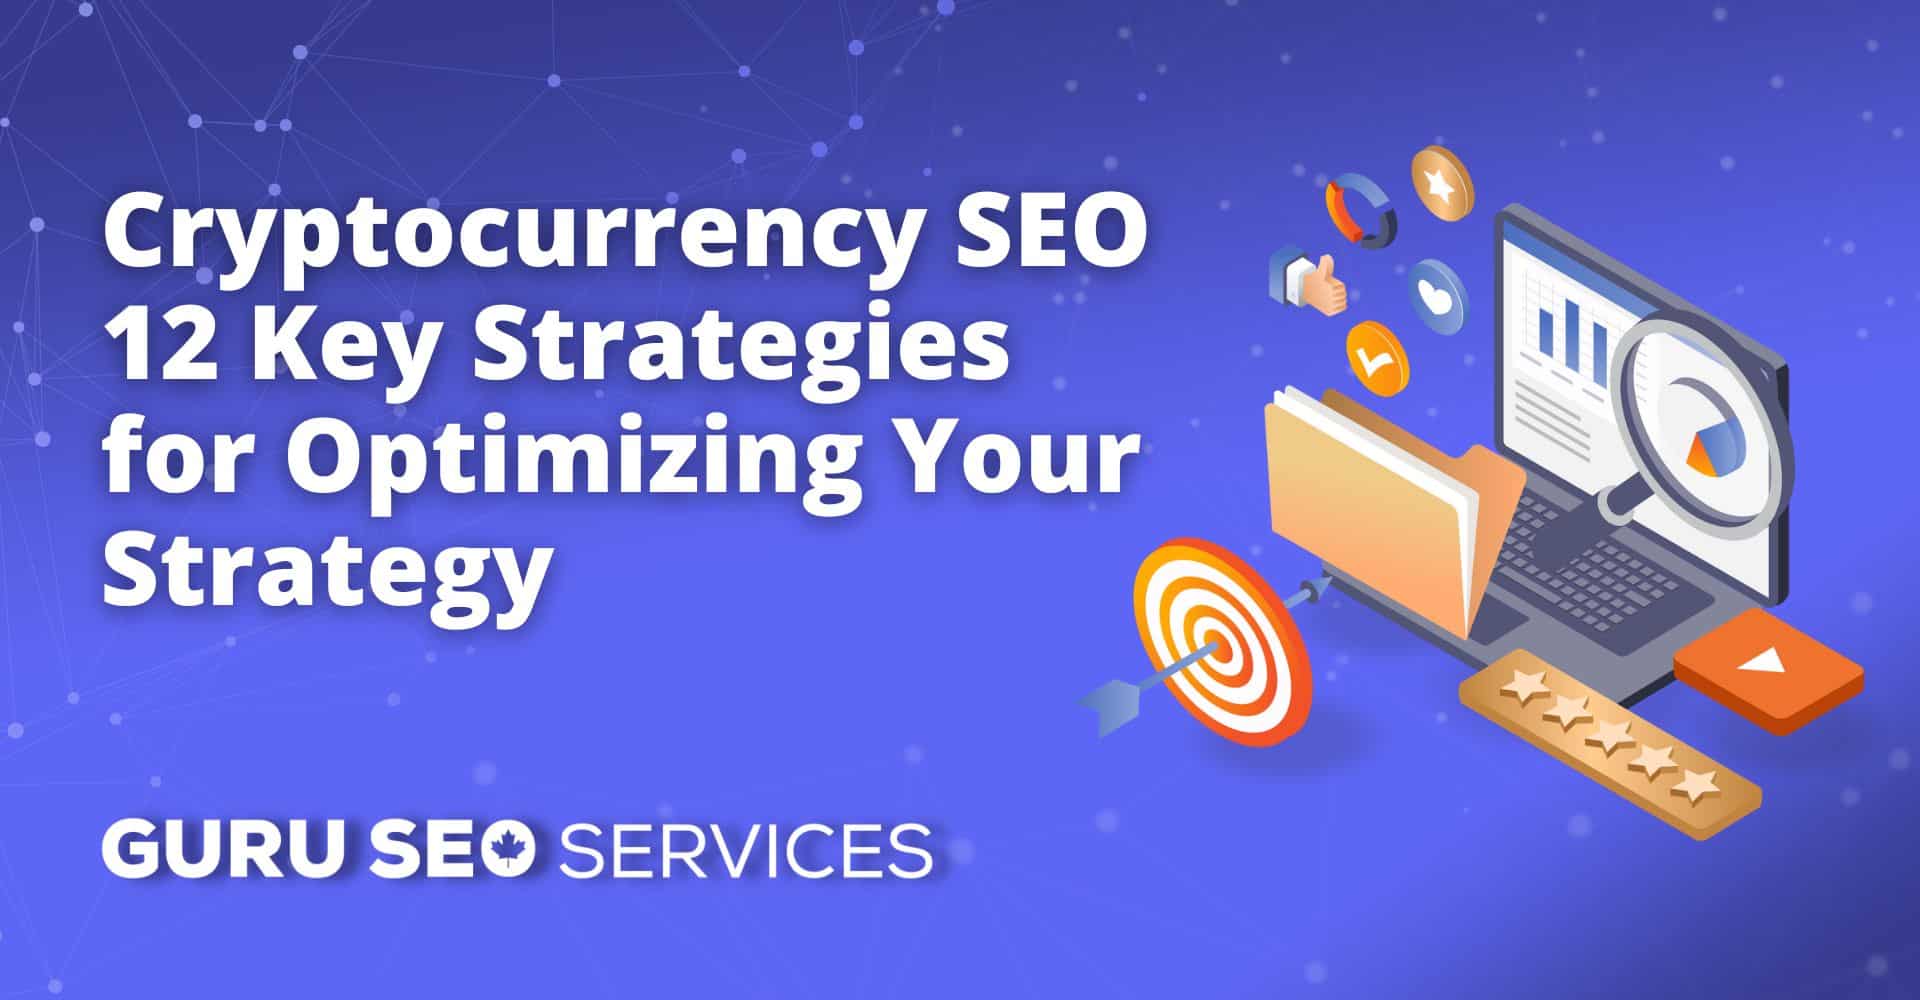 Cryptocurrency SEO: 12 key strategies for optimizing your strategy with web design and SEO services.